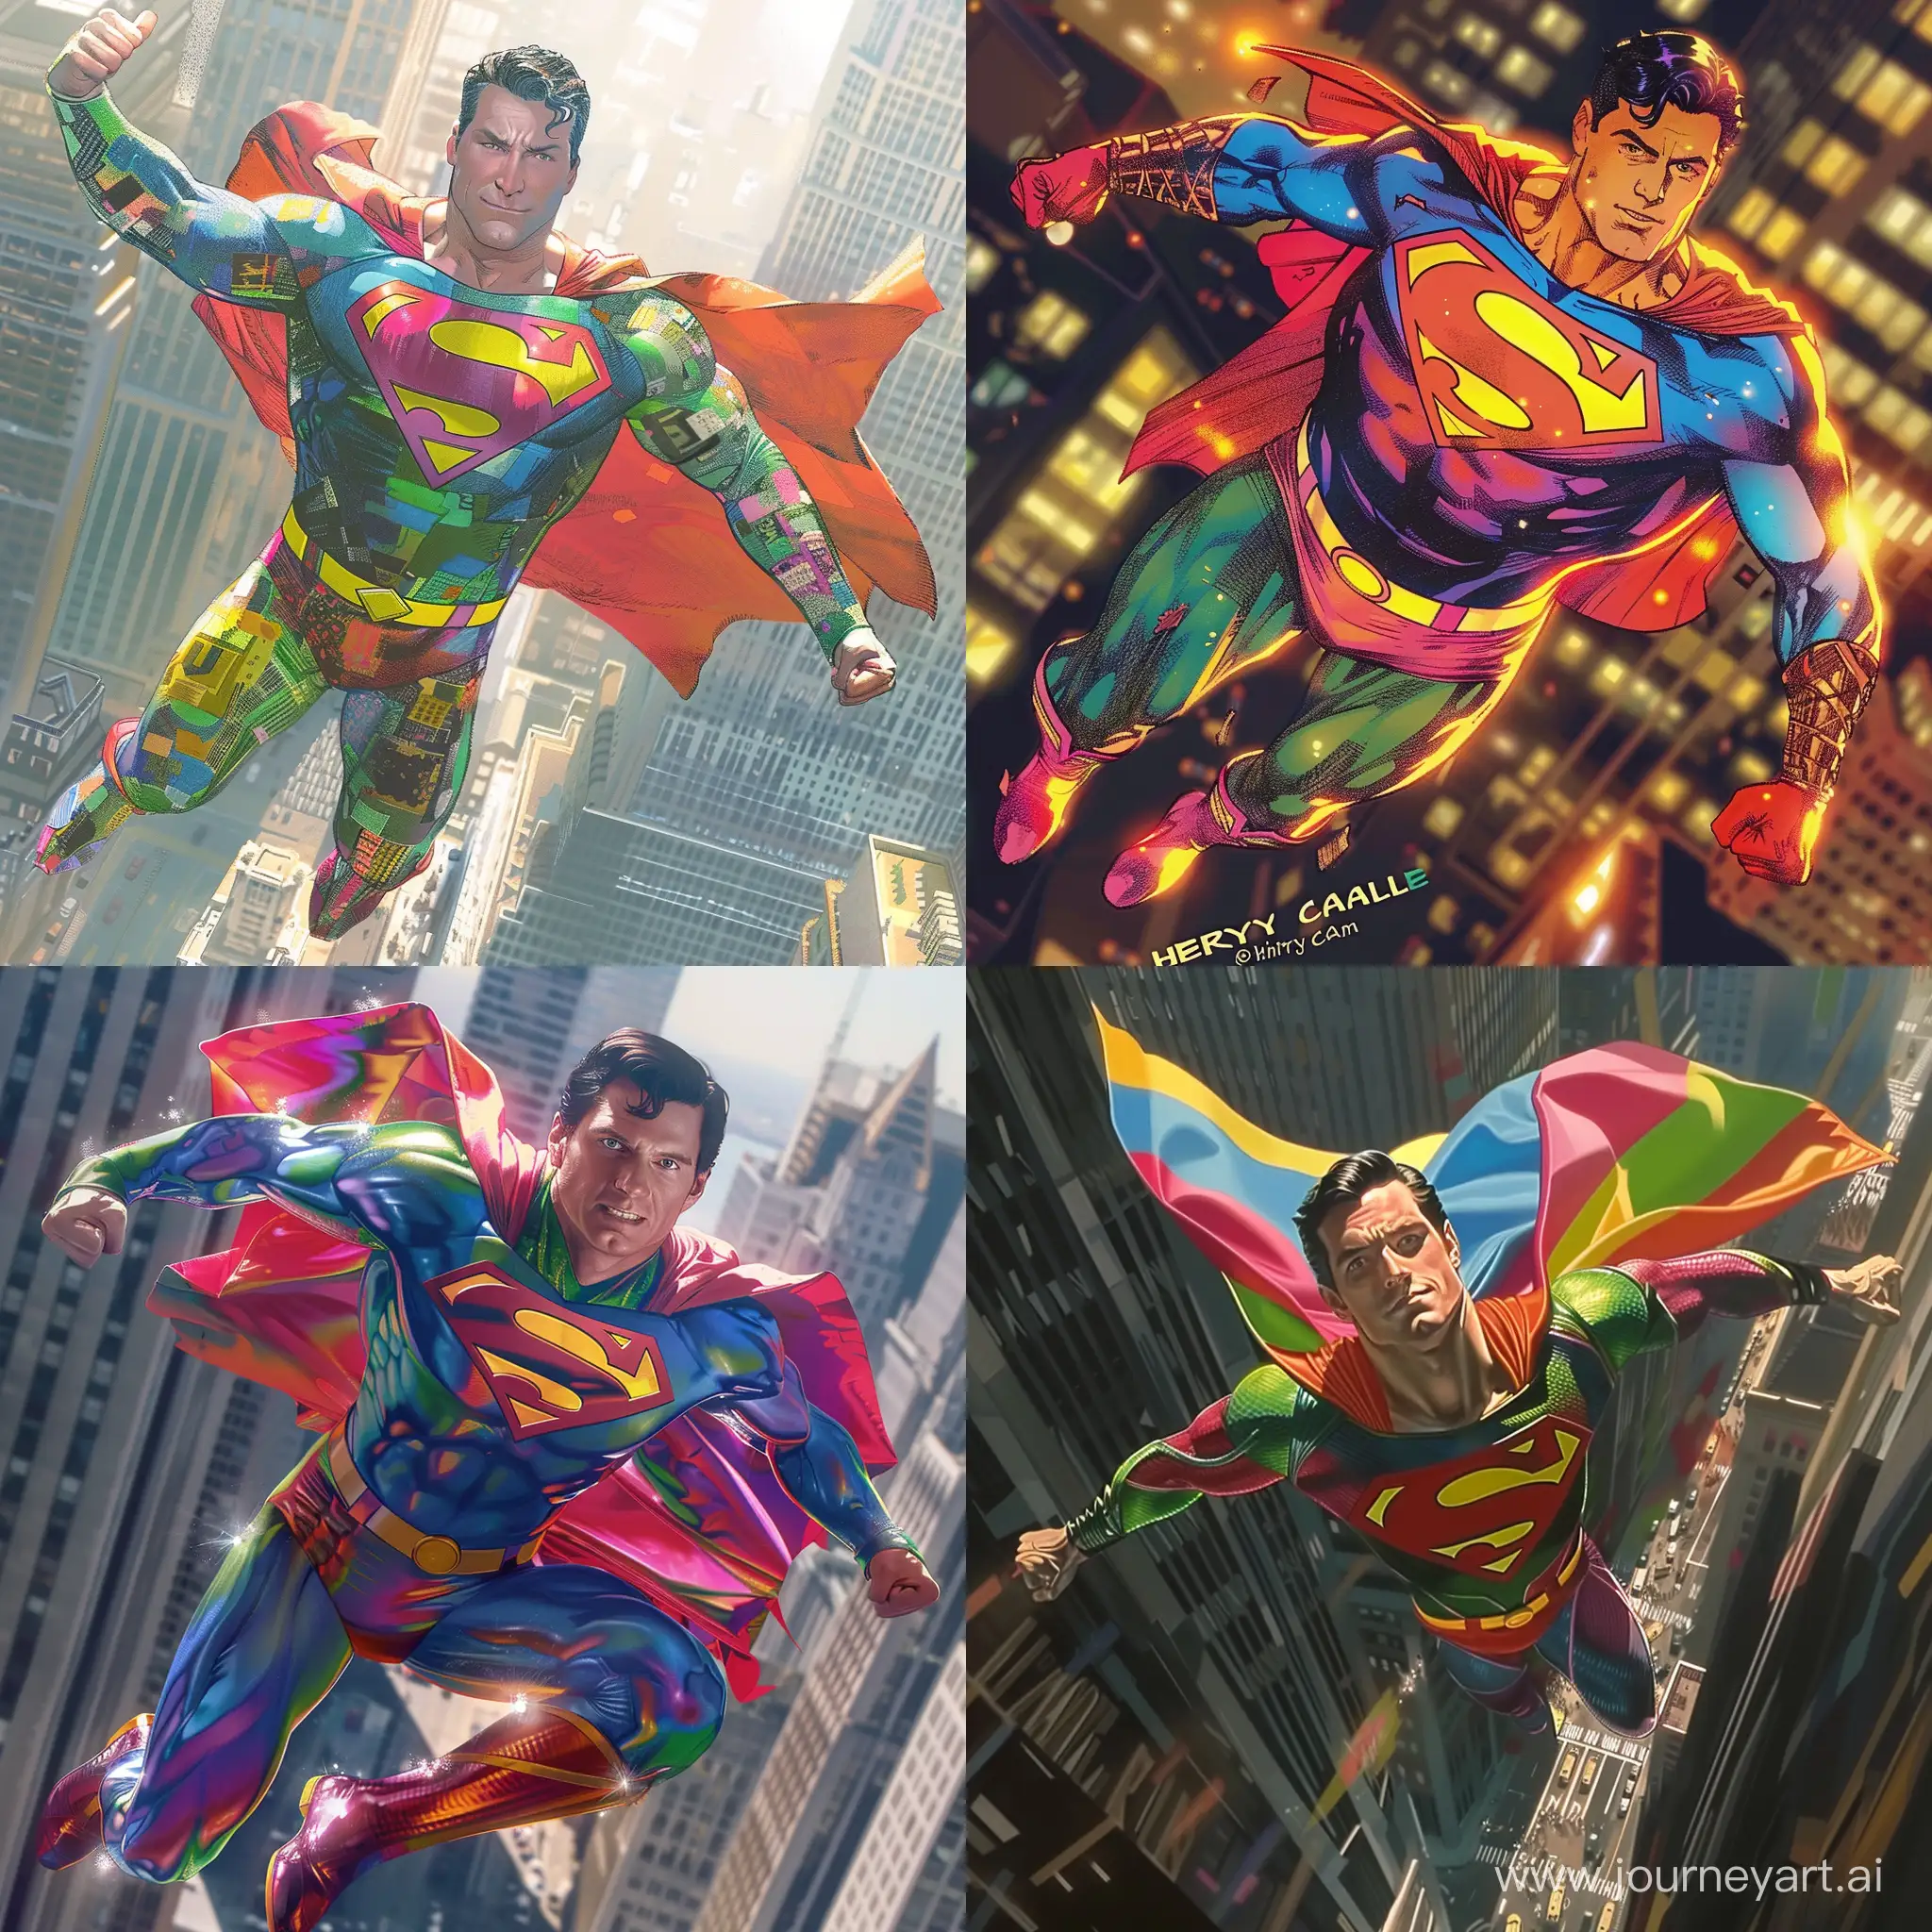 henry cavill superman with vibrant colored suit, flying in the city